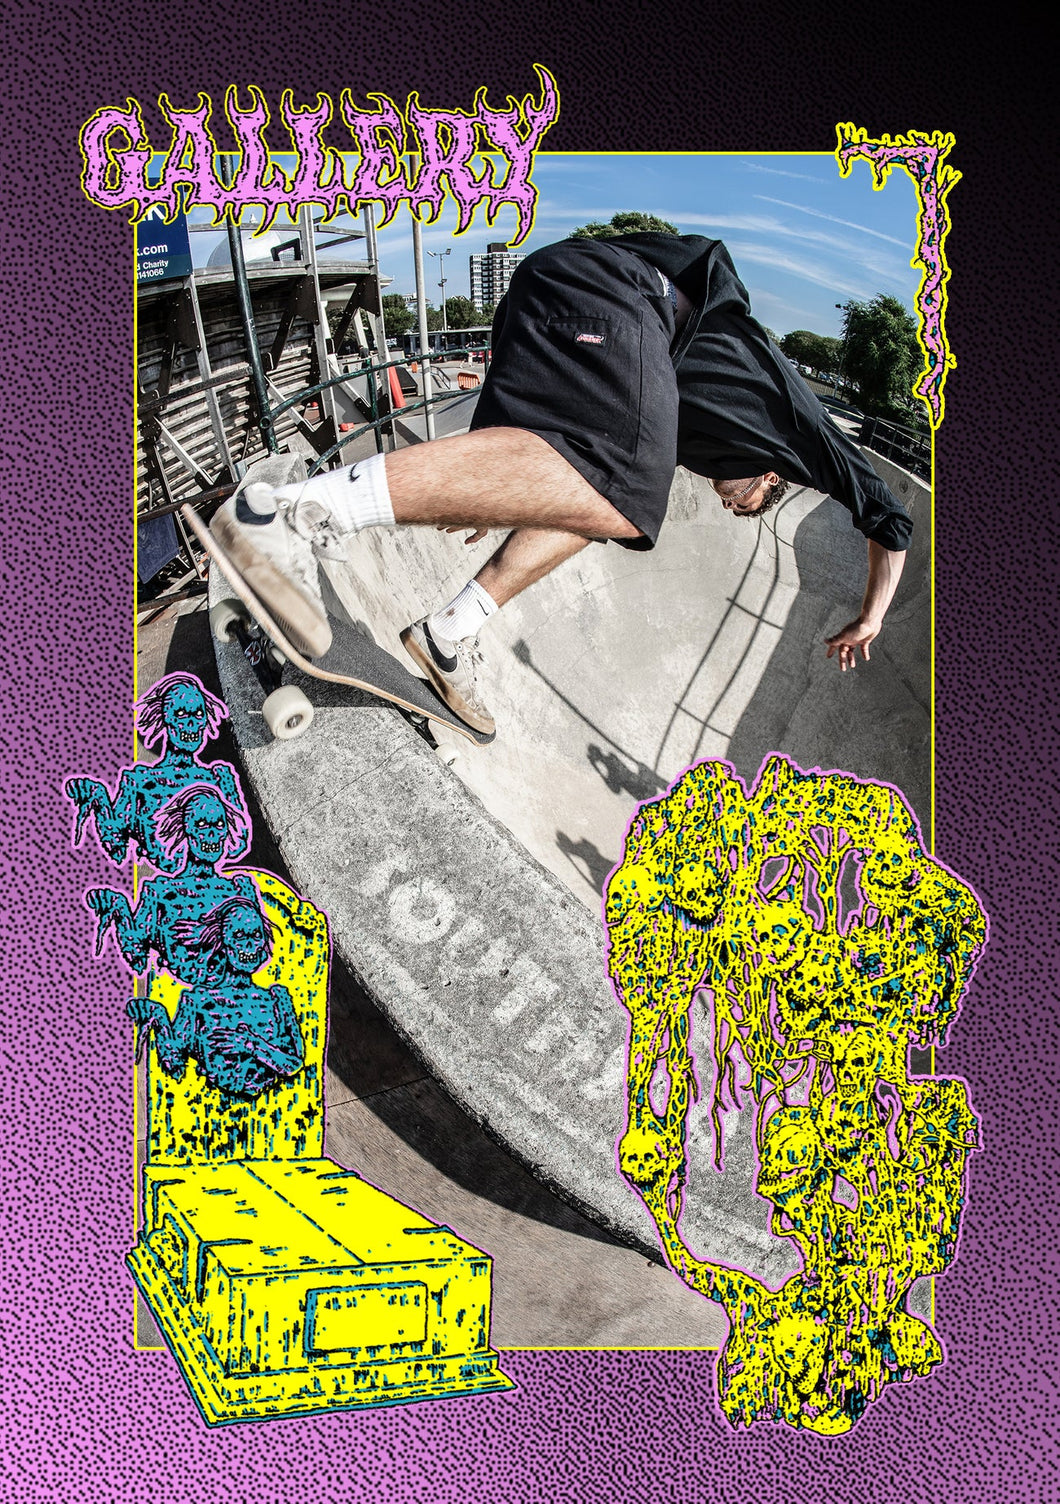 Gallery Skate Mag issue 2